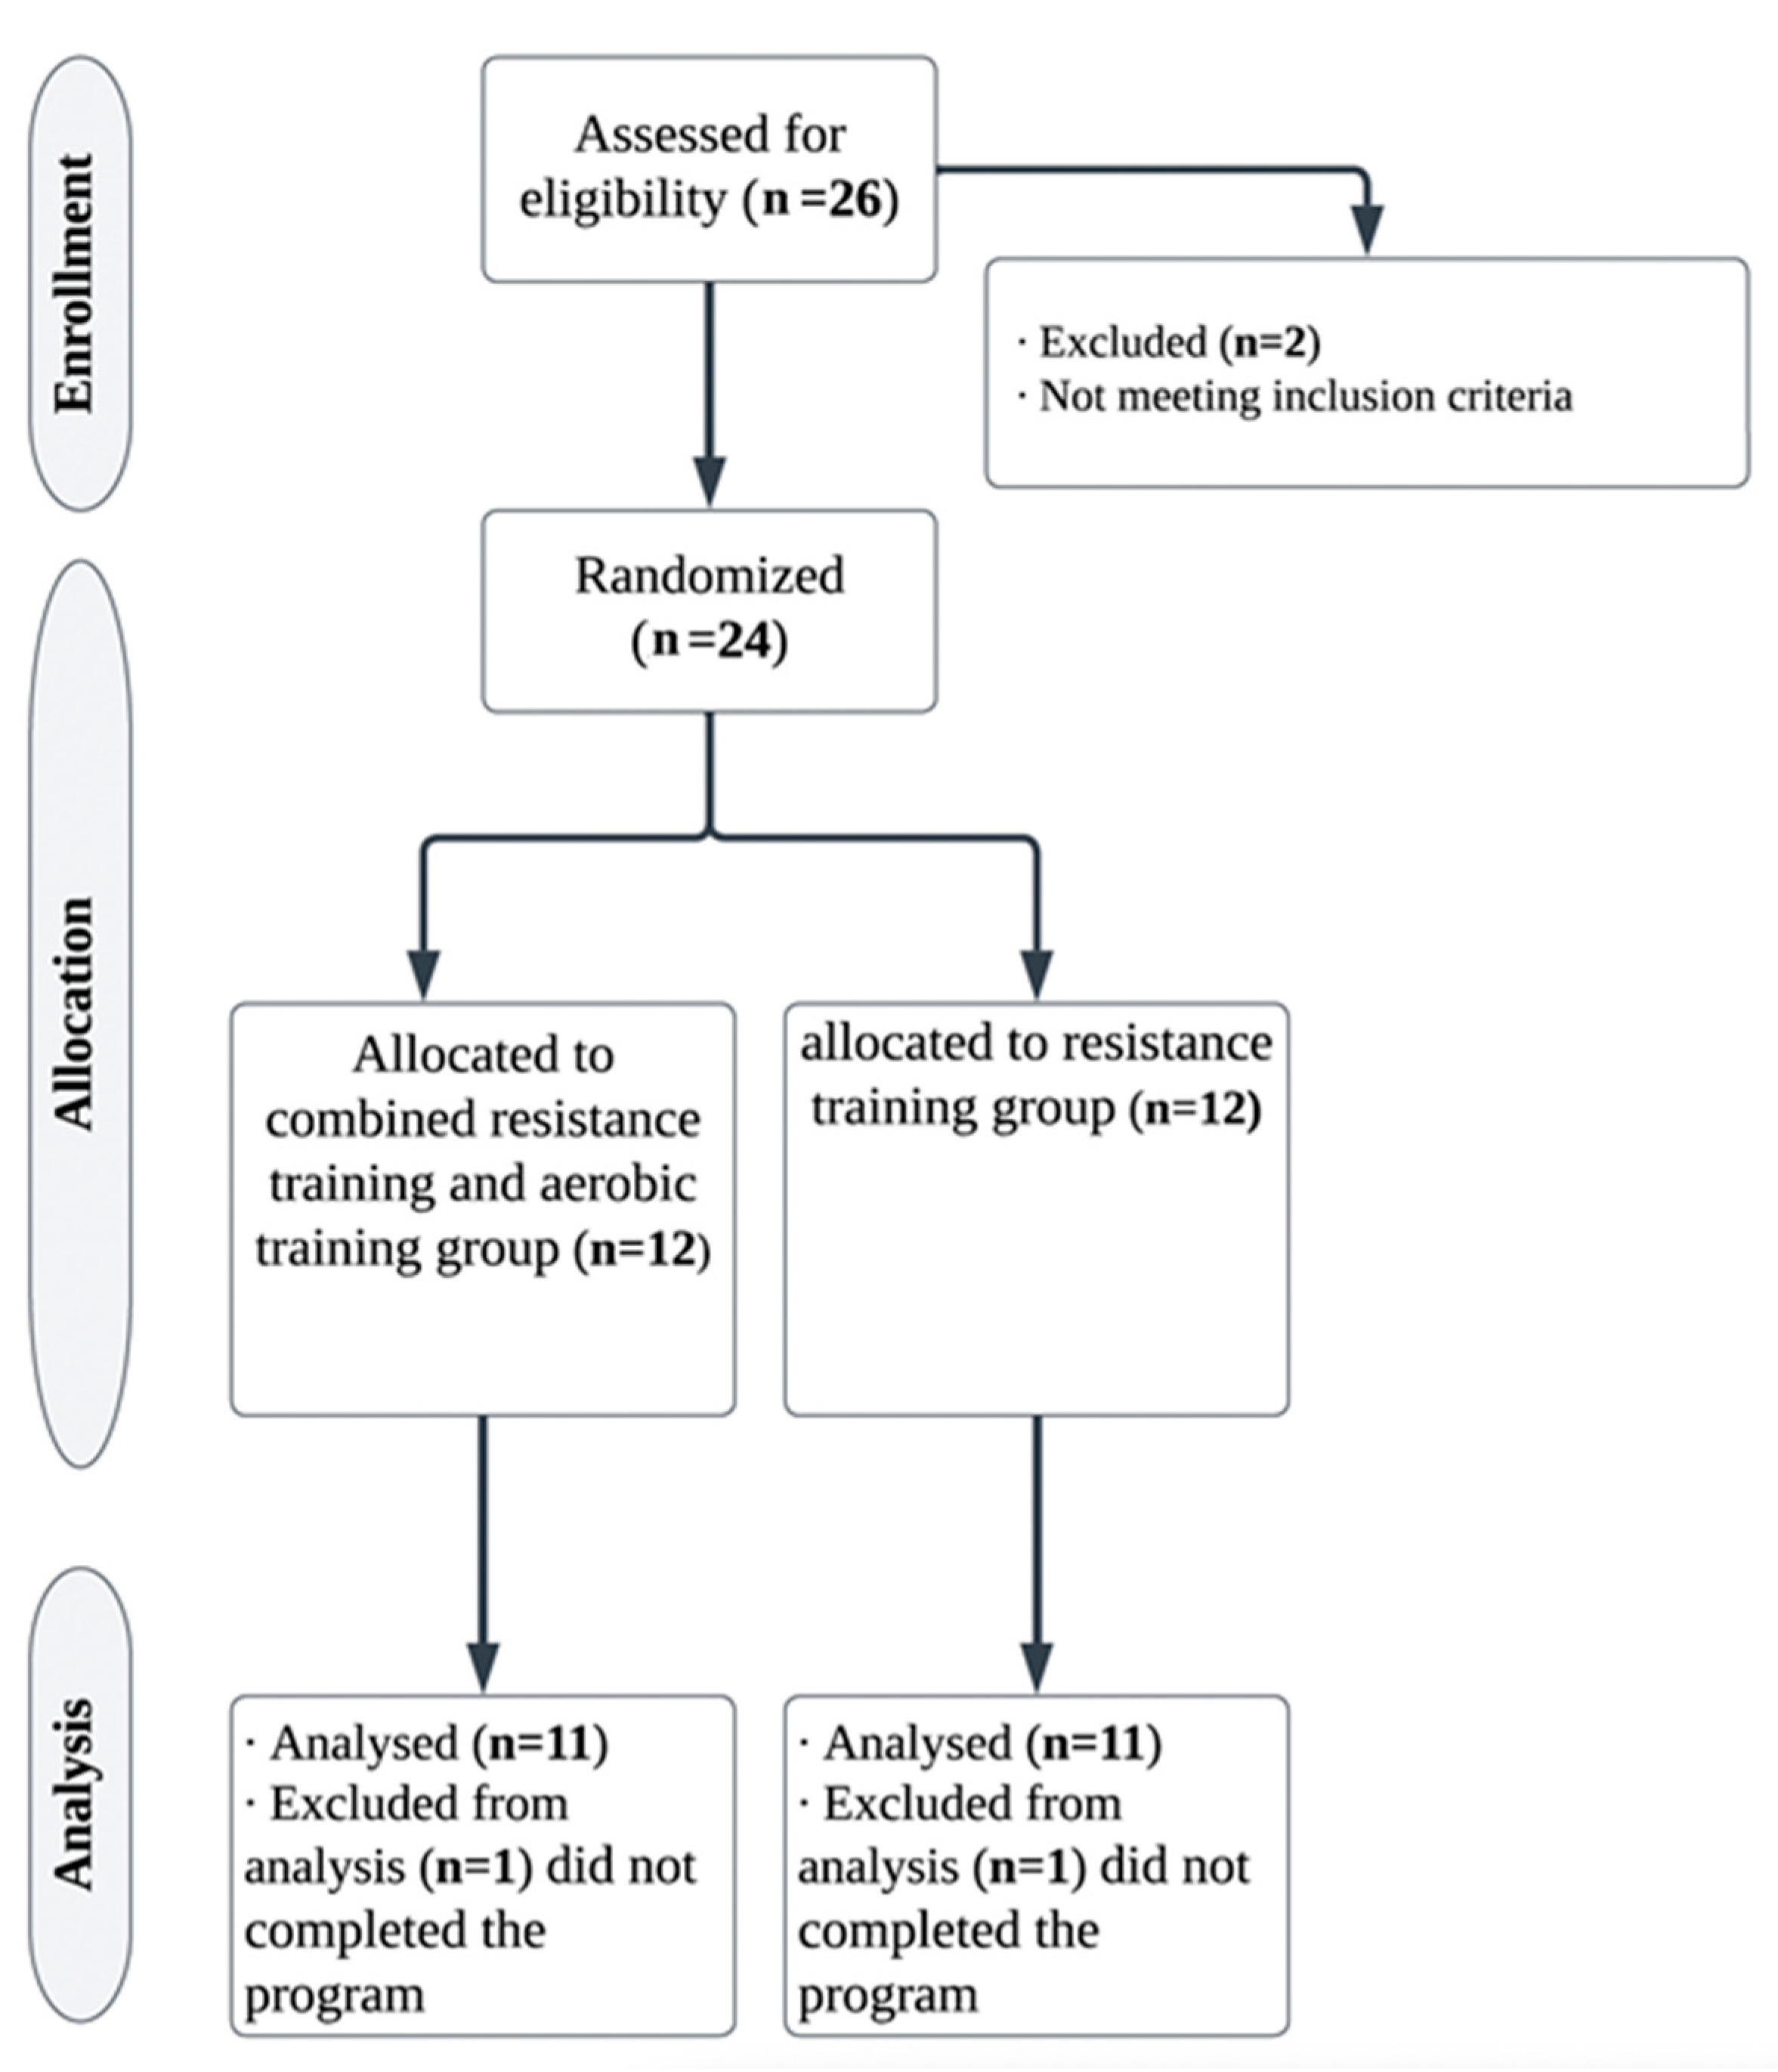 Healthcare Free Full-Text The Effects of Combining Aerobic and Heavy Resistance Training on Body Composition, Muscle Hypertrophy, and Exercise Satisfaction in Physically Active Adults pic